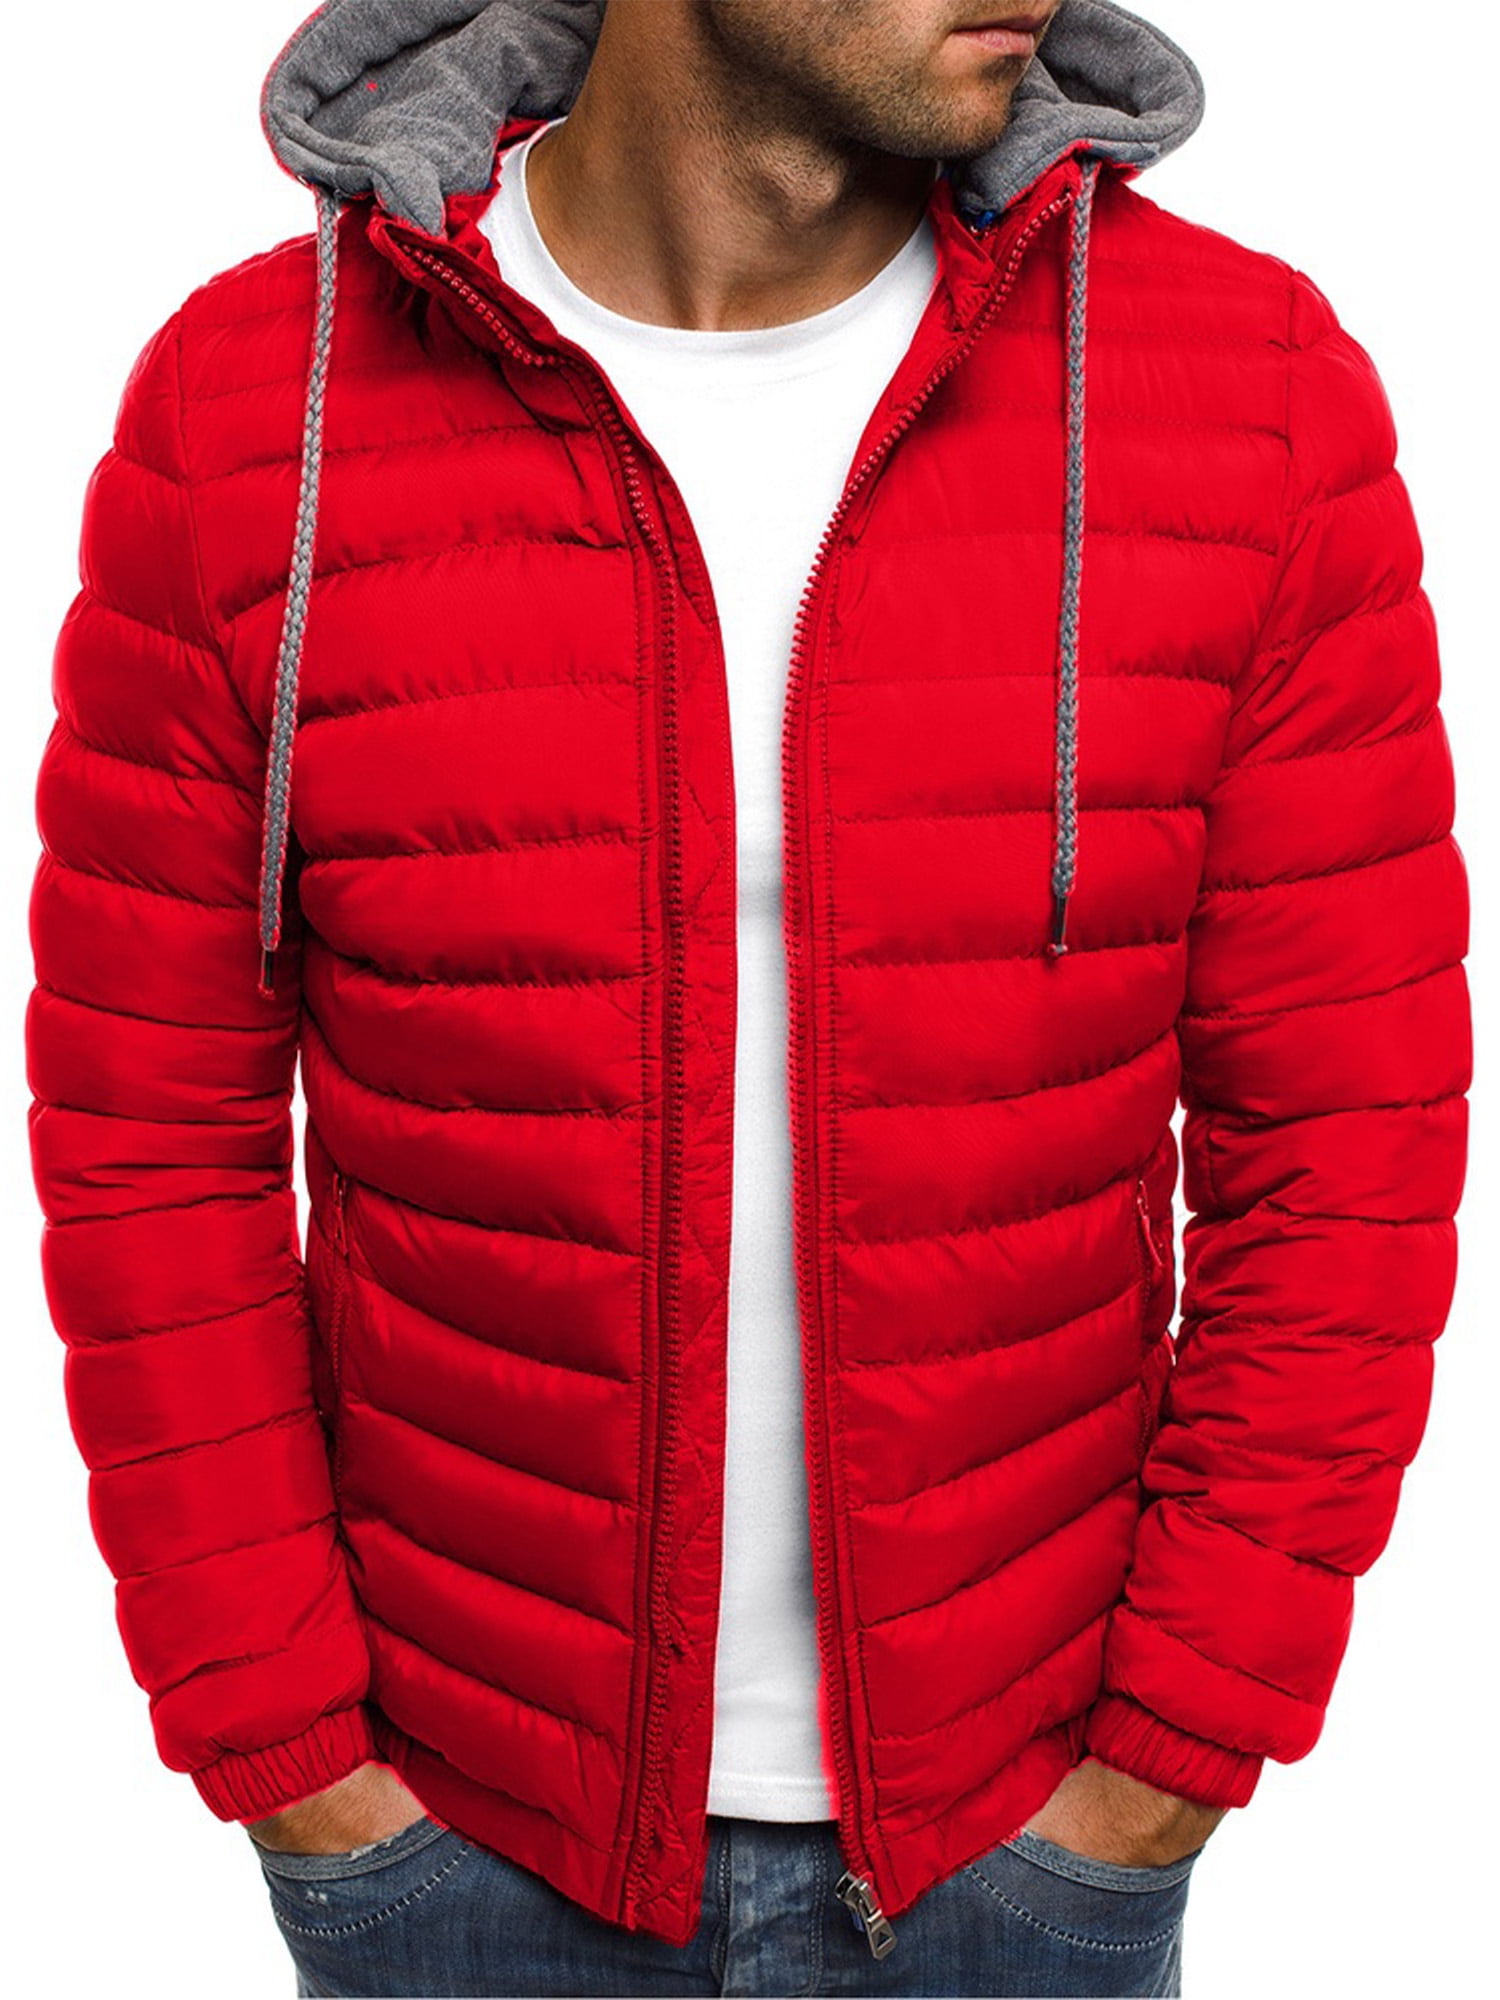 Mstyle Mens Fall Winter Plus Size Zip Up Stand Collar Warm Thicken Quilted Jacket Coat Outerwear 